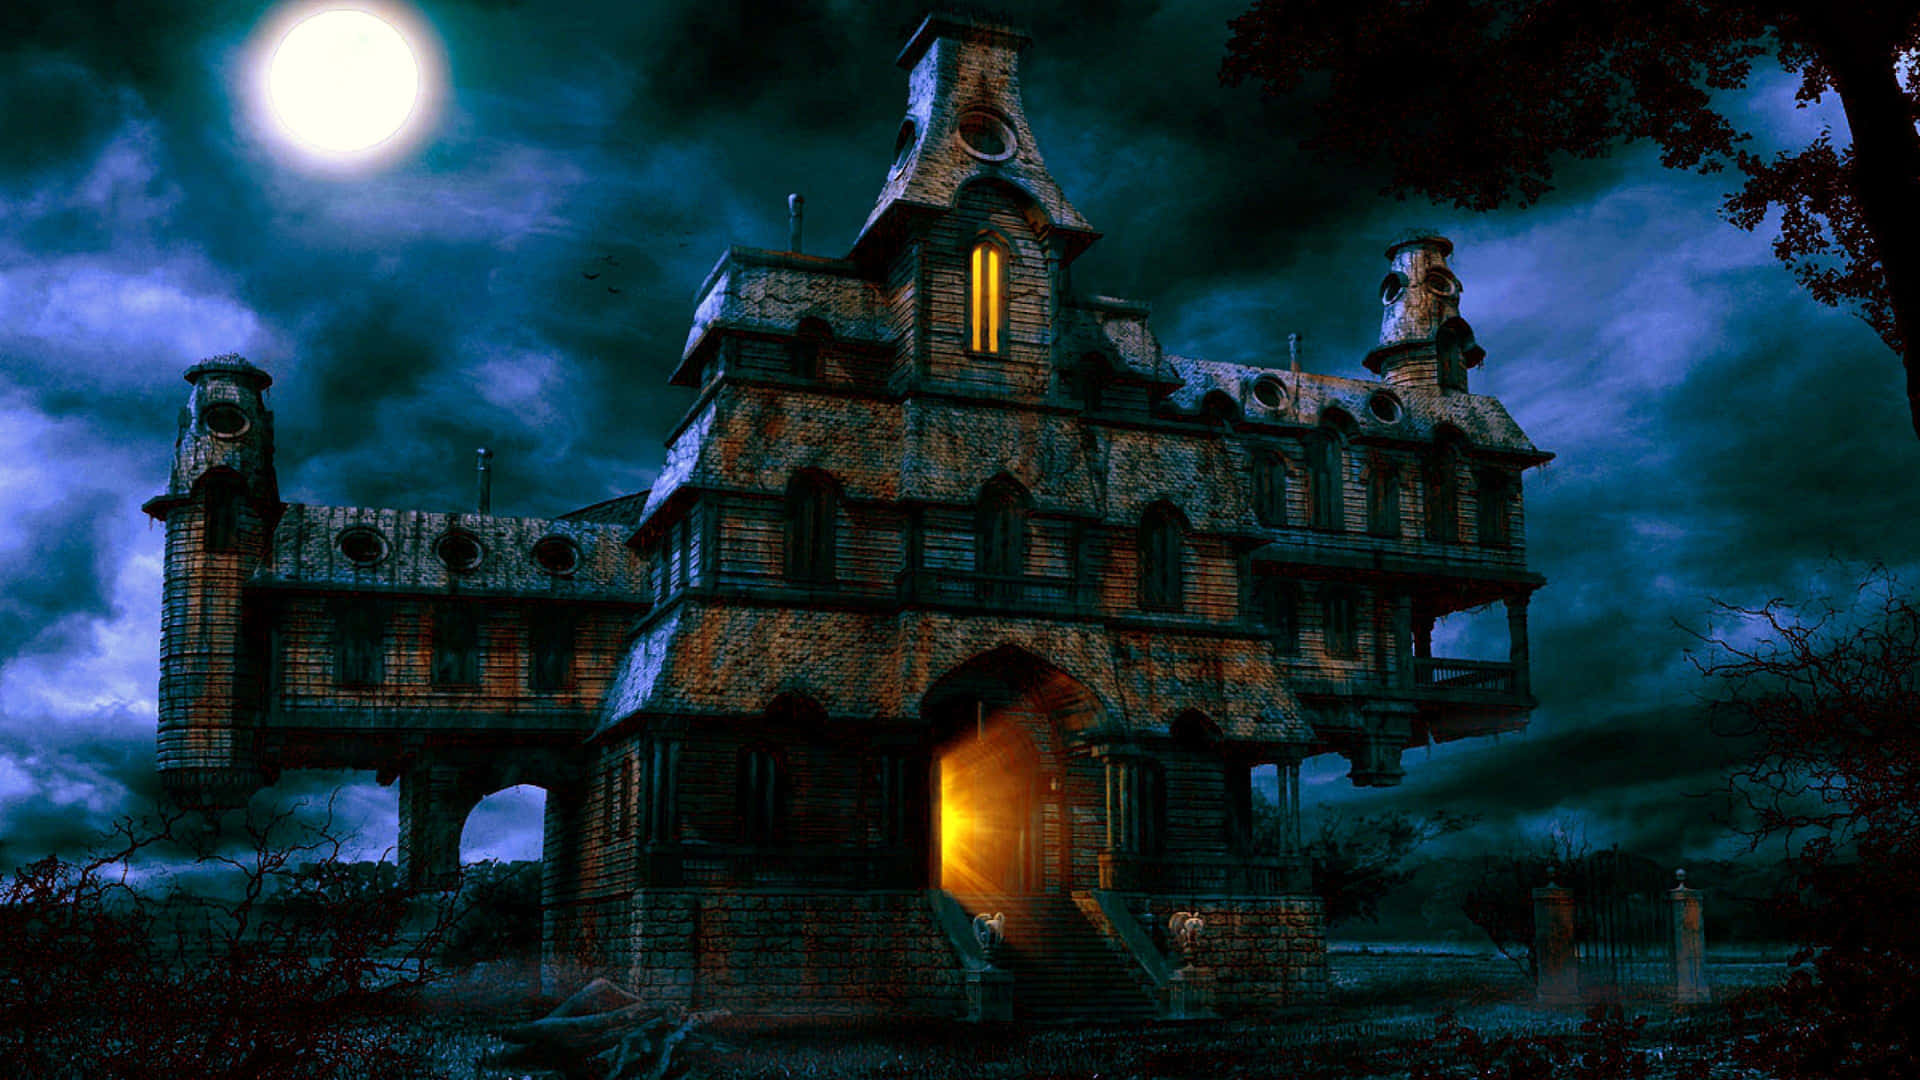 Be brave and explore the haunted house!